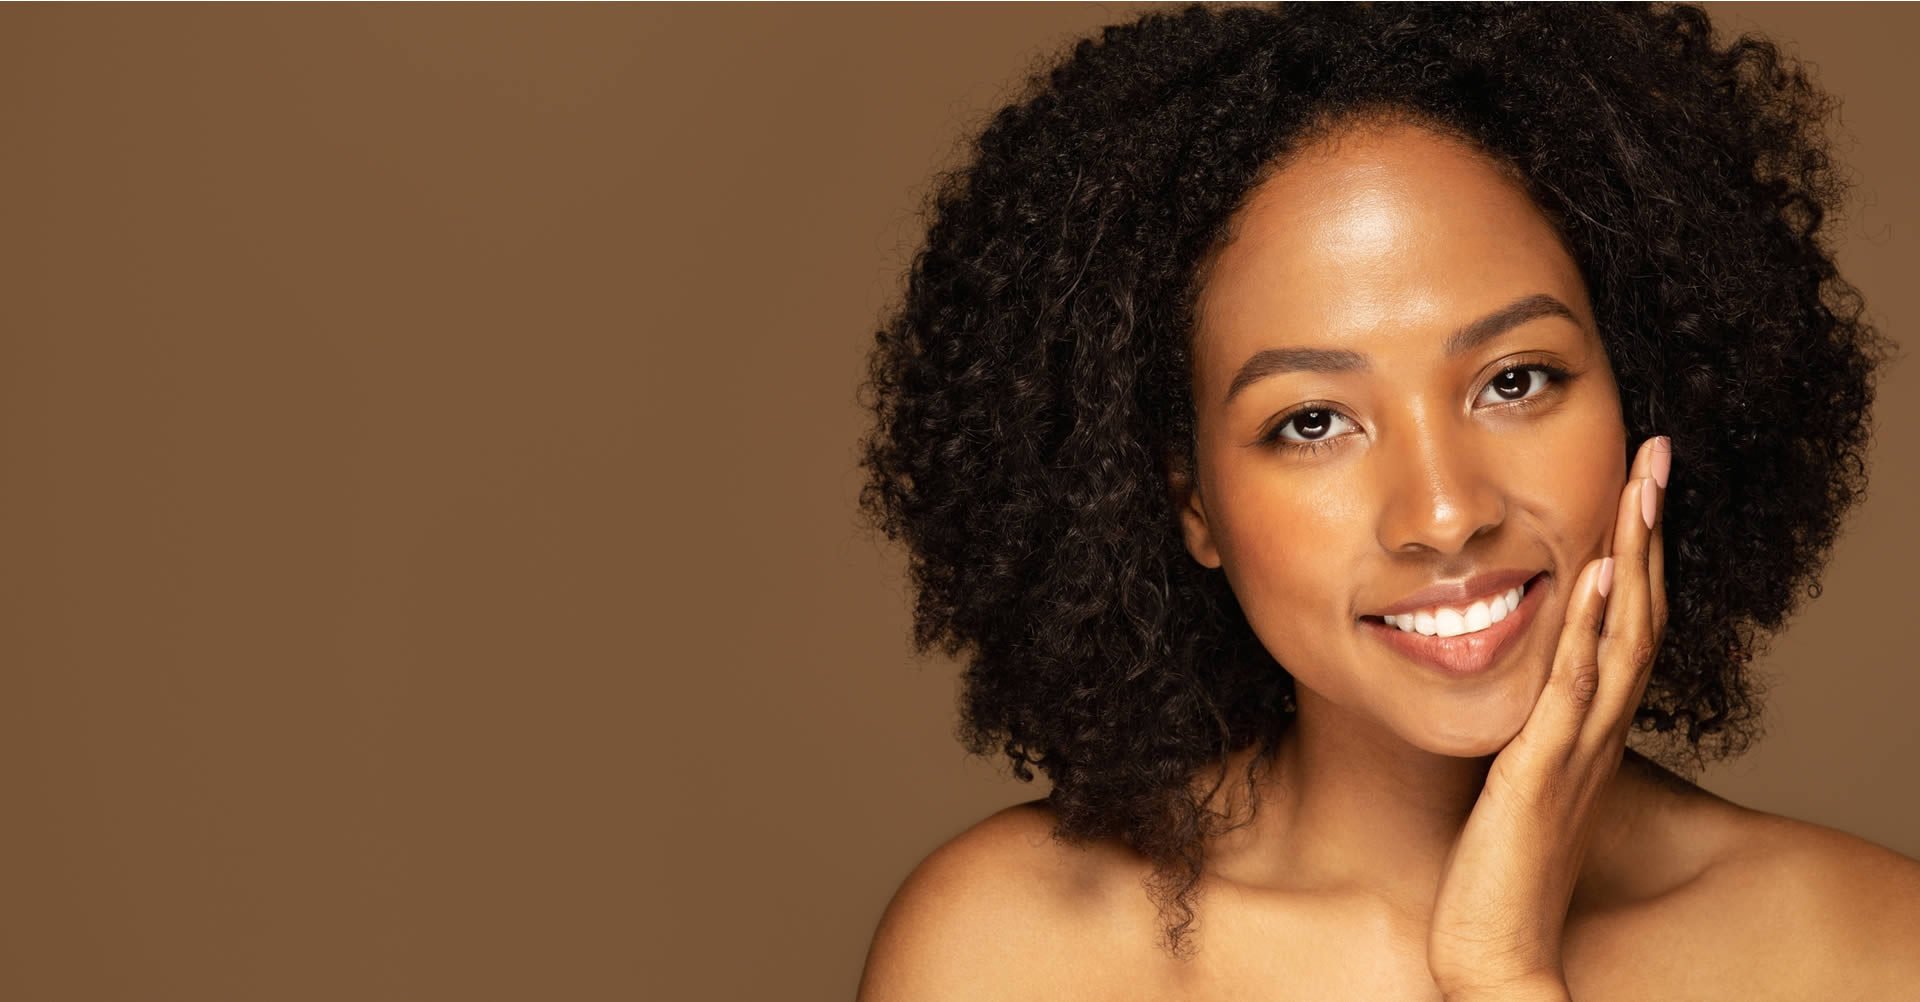 Skin Care Treatment in District Heights, MD